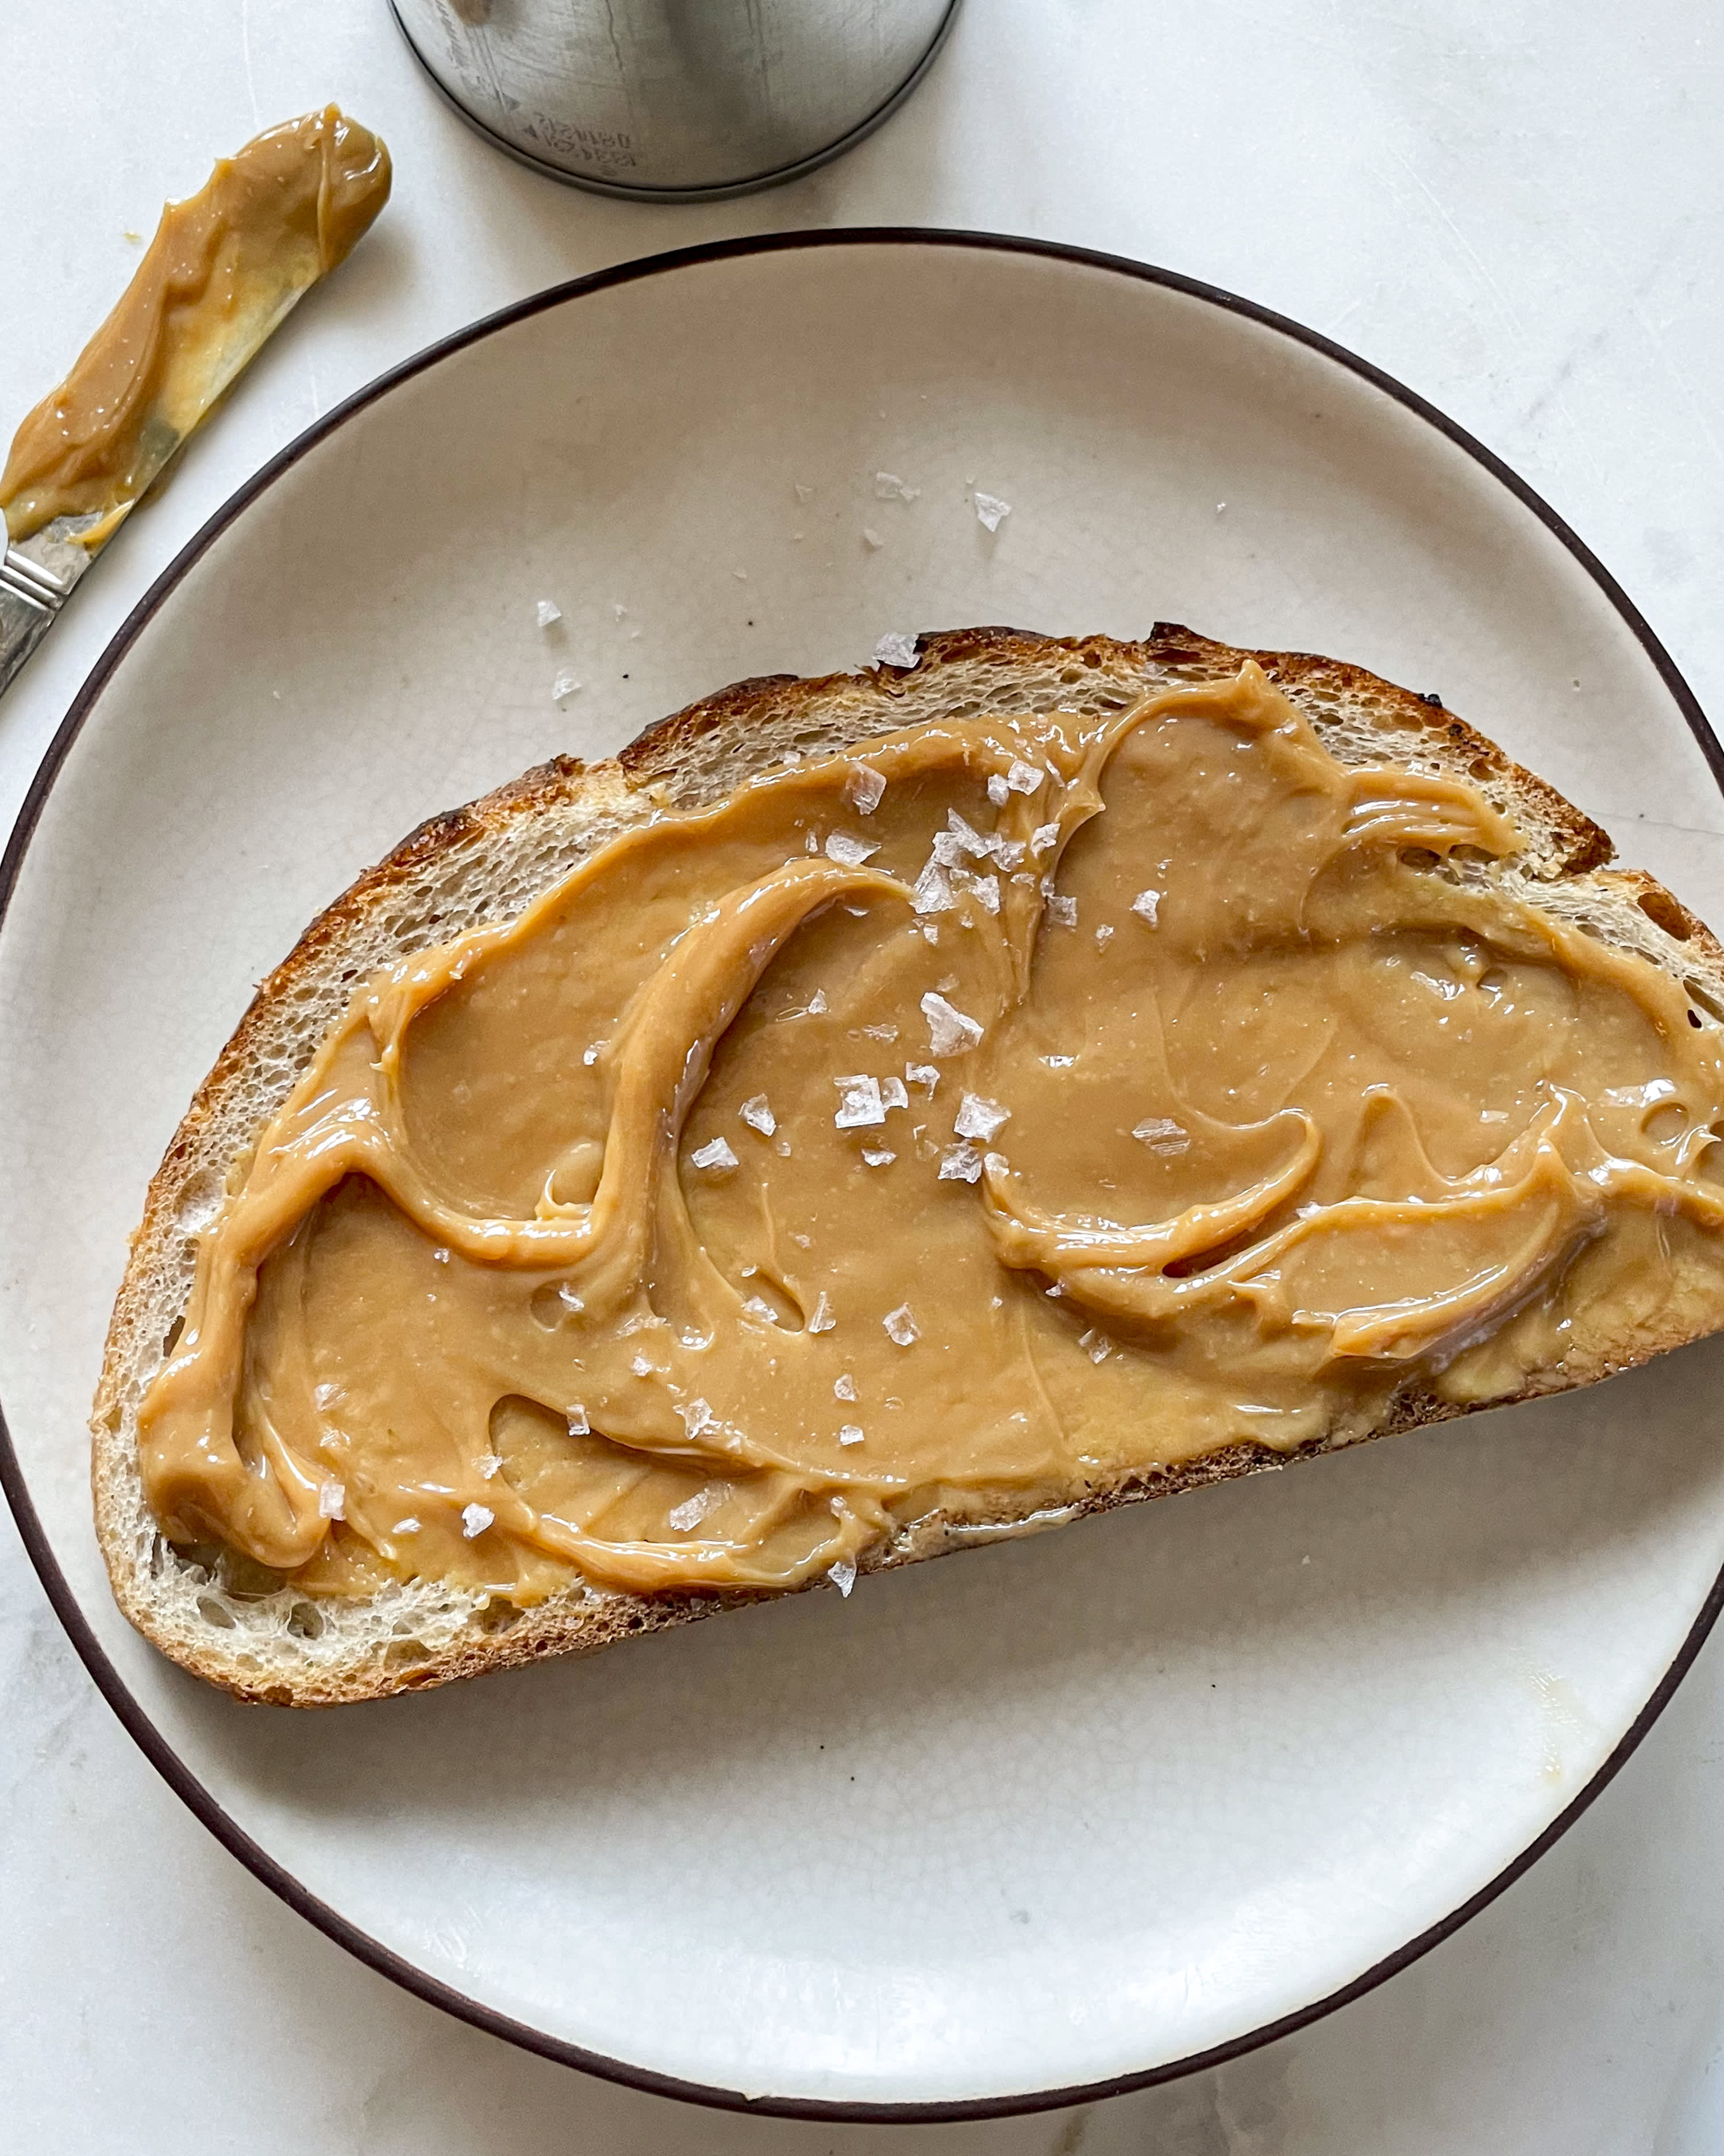 Dulce de leche: the sweet, sticky spread you think you know